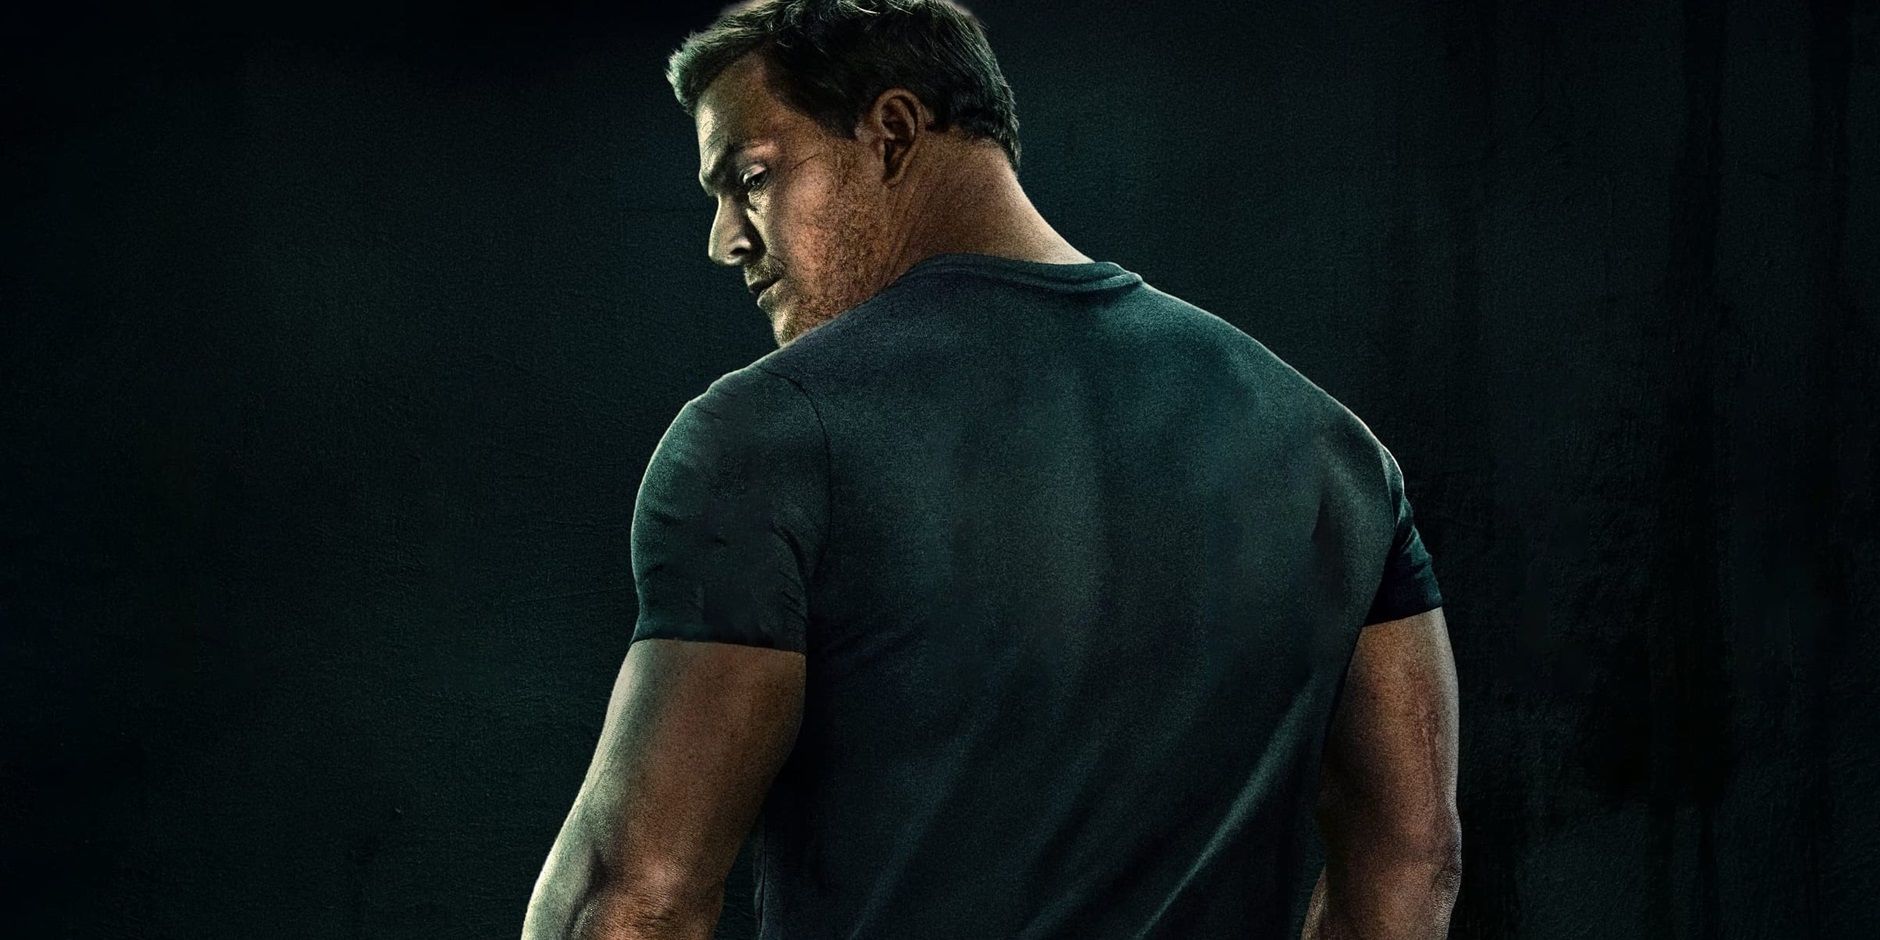 Alan Ritchson looking over his shoulder on the poster for Reacher season 2